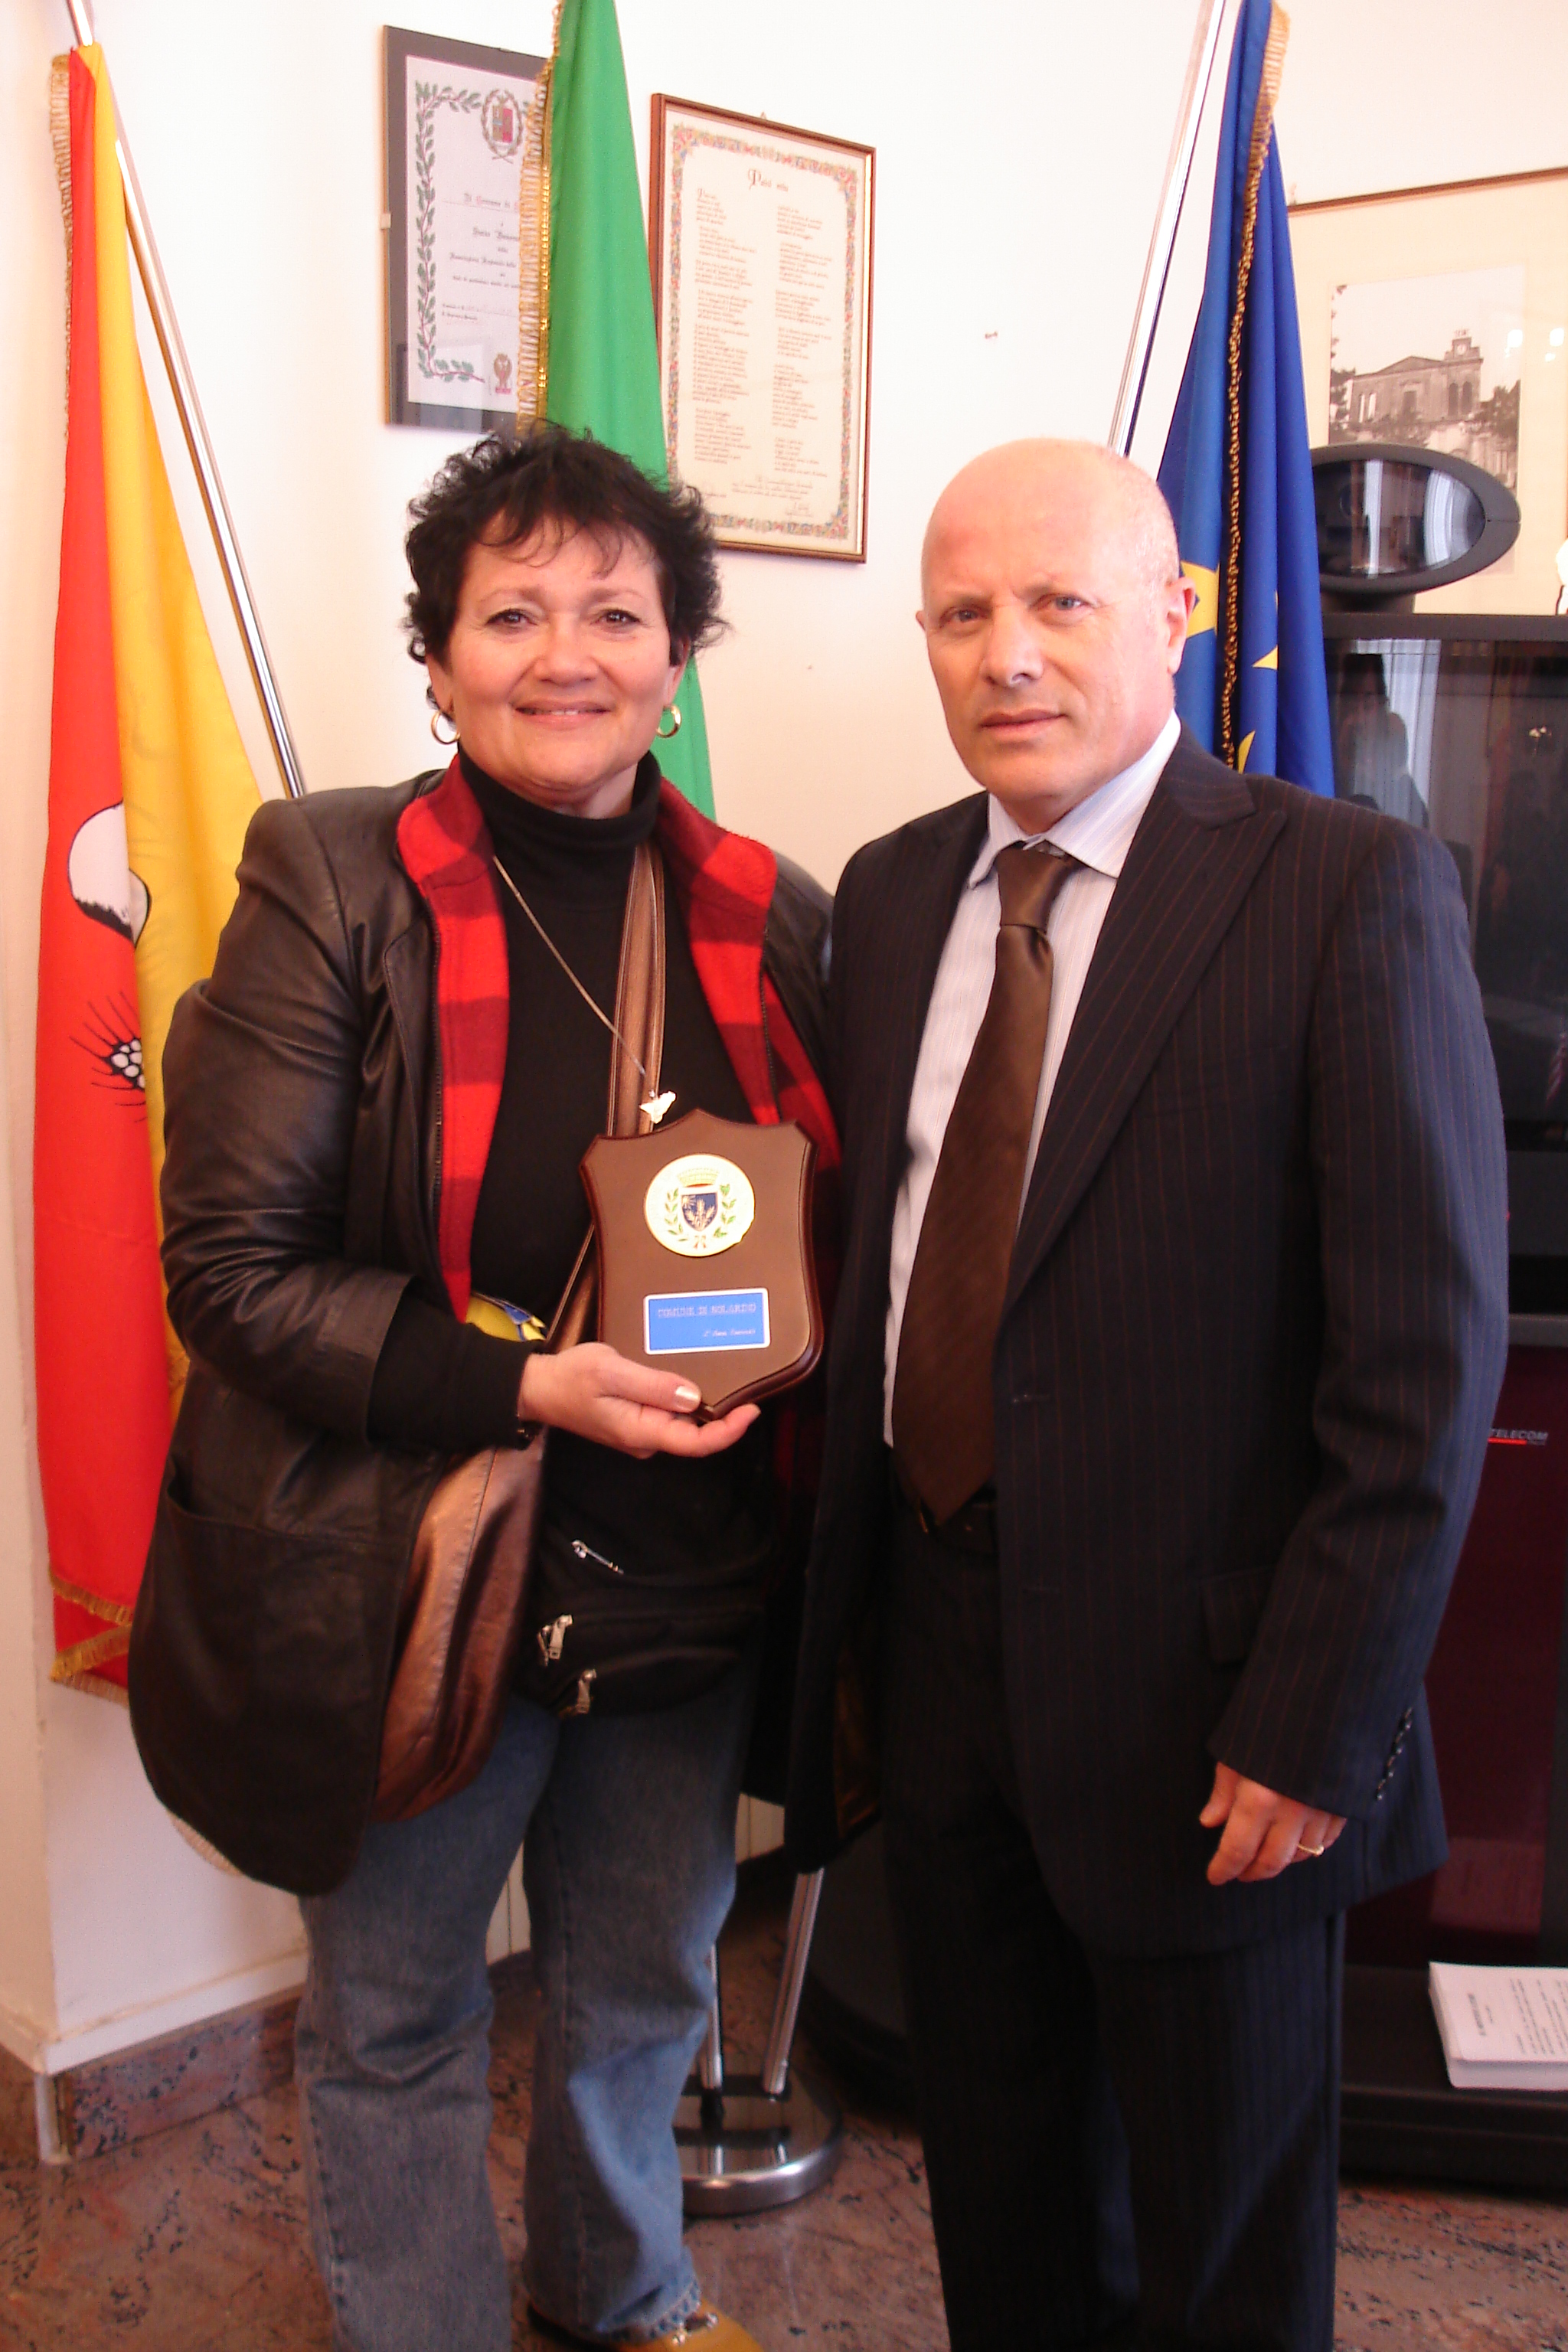 A SICILIAN ODYSSEY Director Jenna Maria Constantine on location with the Mayor of Solarino, Siicly